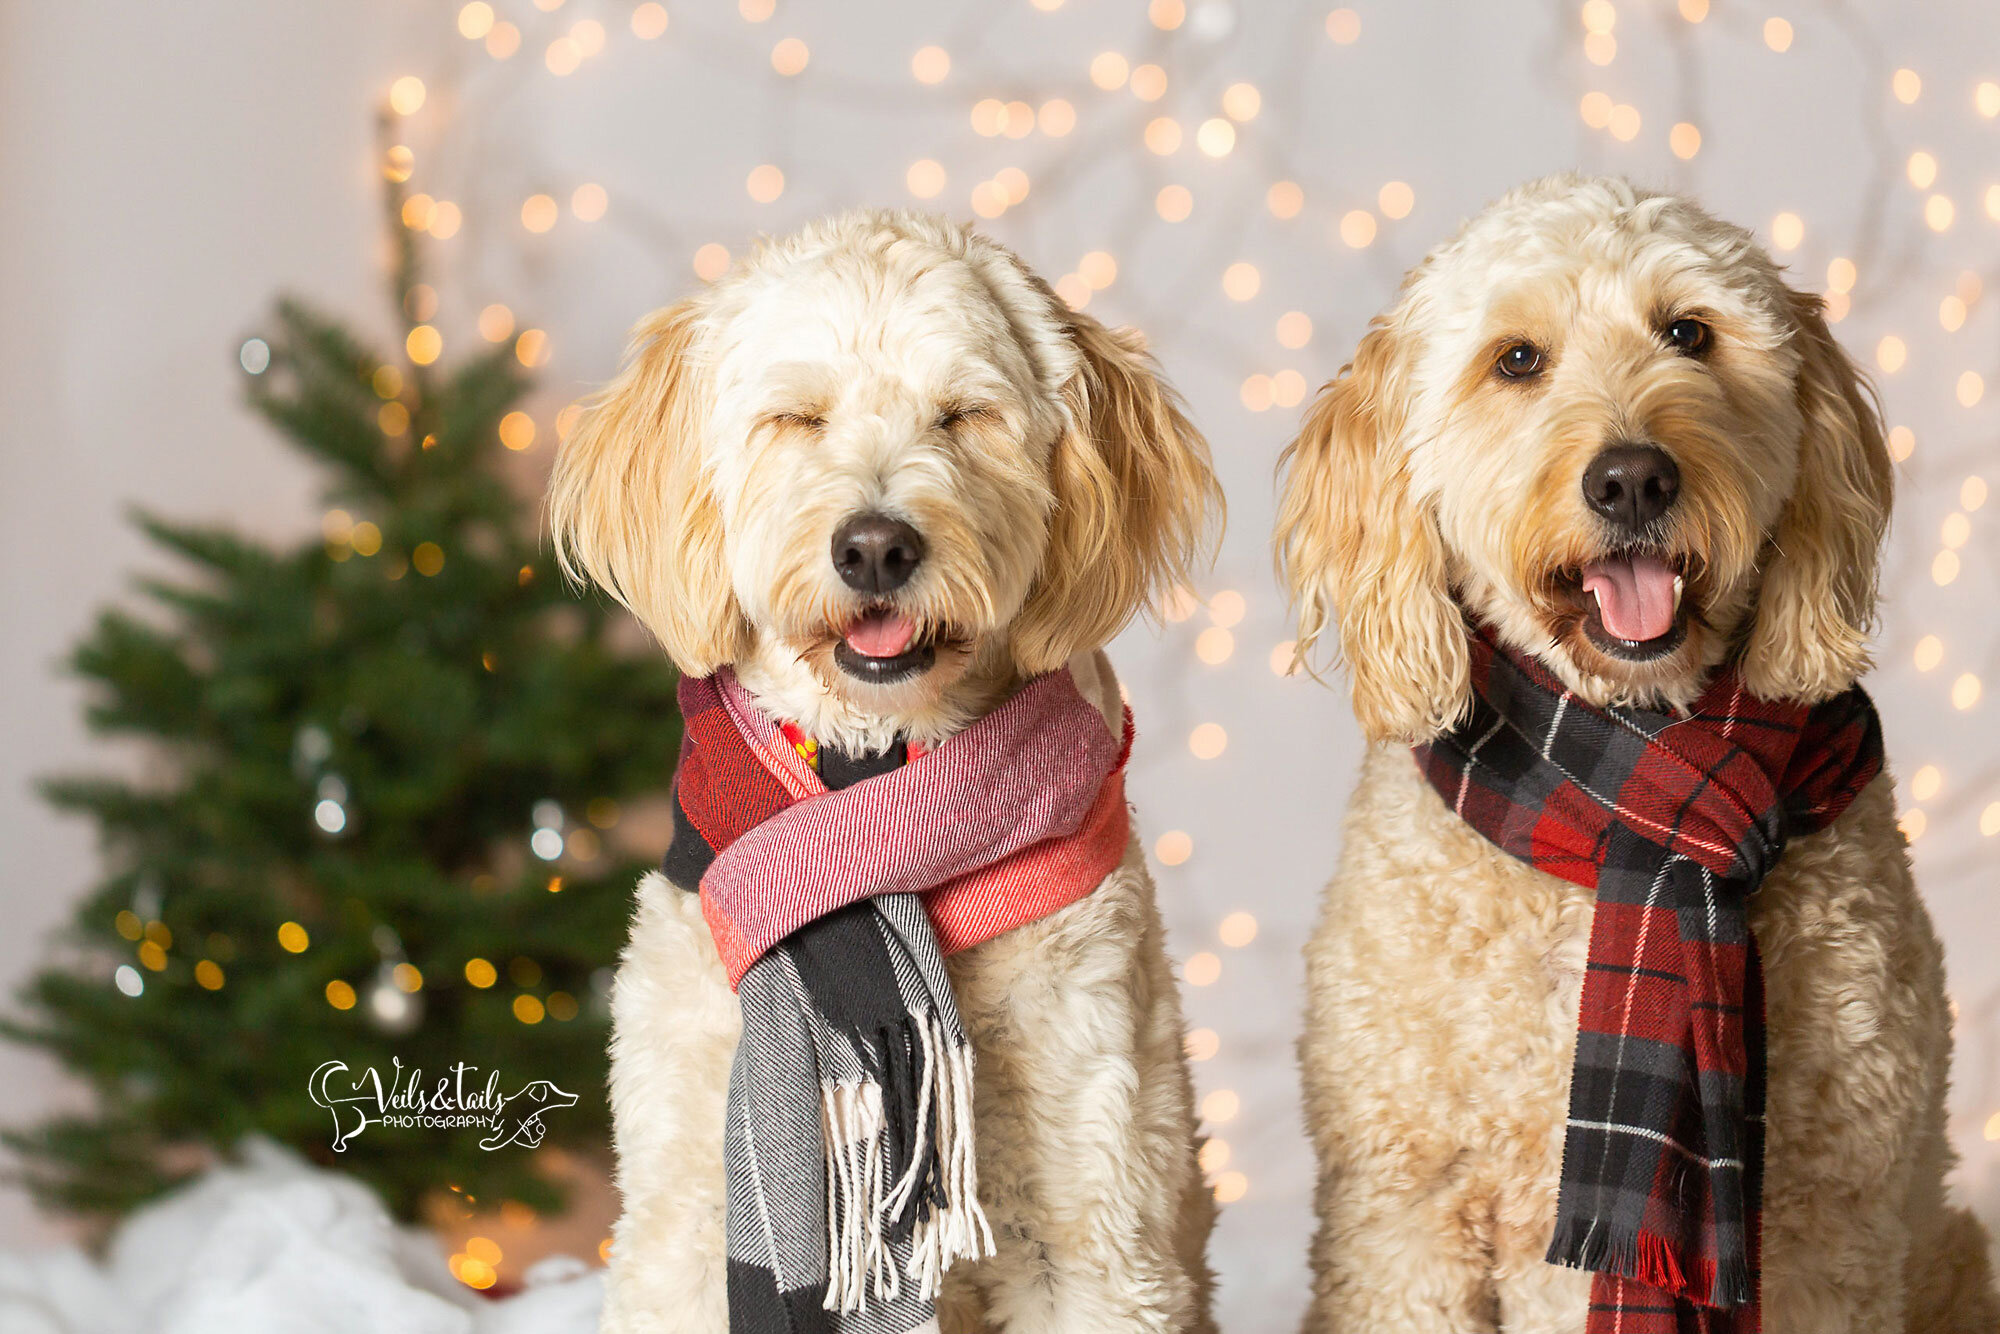 santa barbara holiday photographer - doodles and twinkle lights